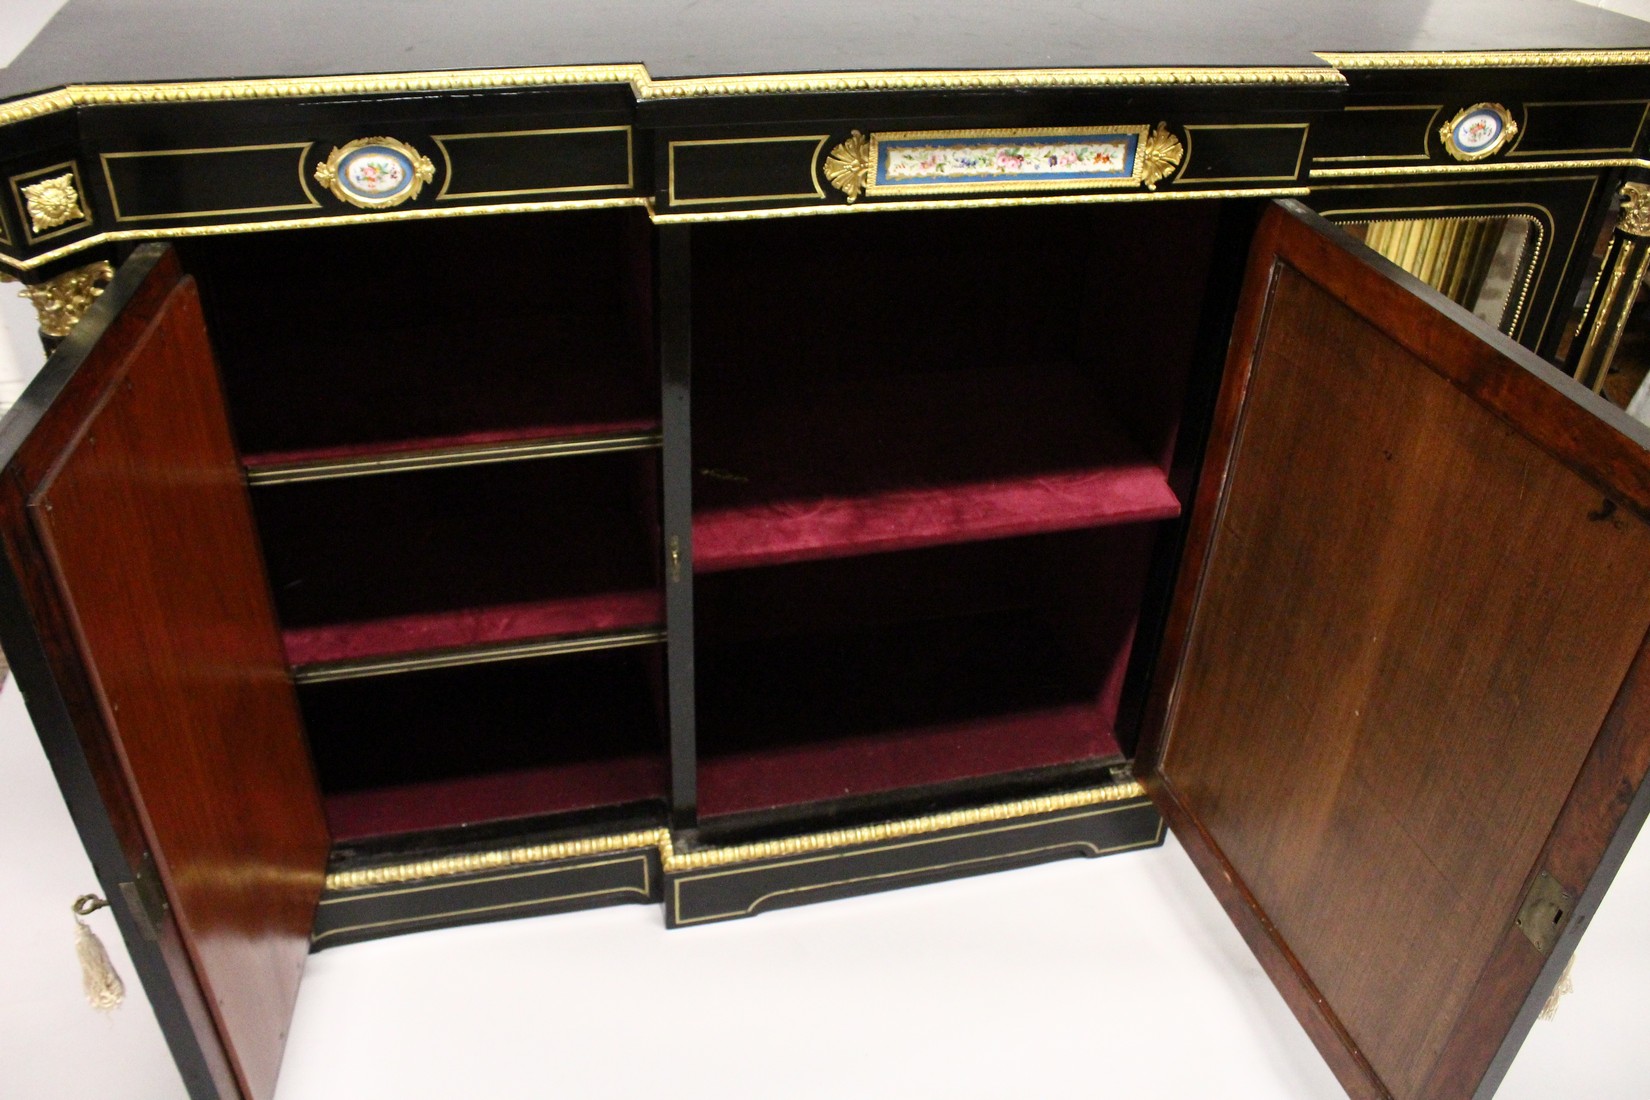 A VERY GOOD 19TH CENTURY FRENCH EBONY BREAK FRONT CREDENZA, with ornate mounts inset with Sevres - Image 6 of 6